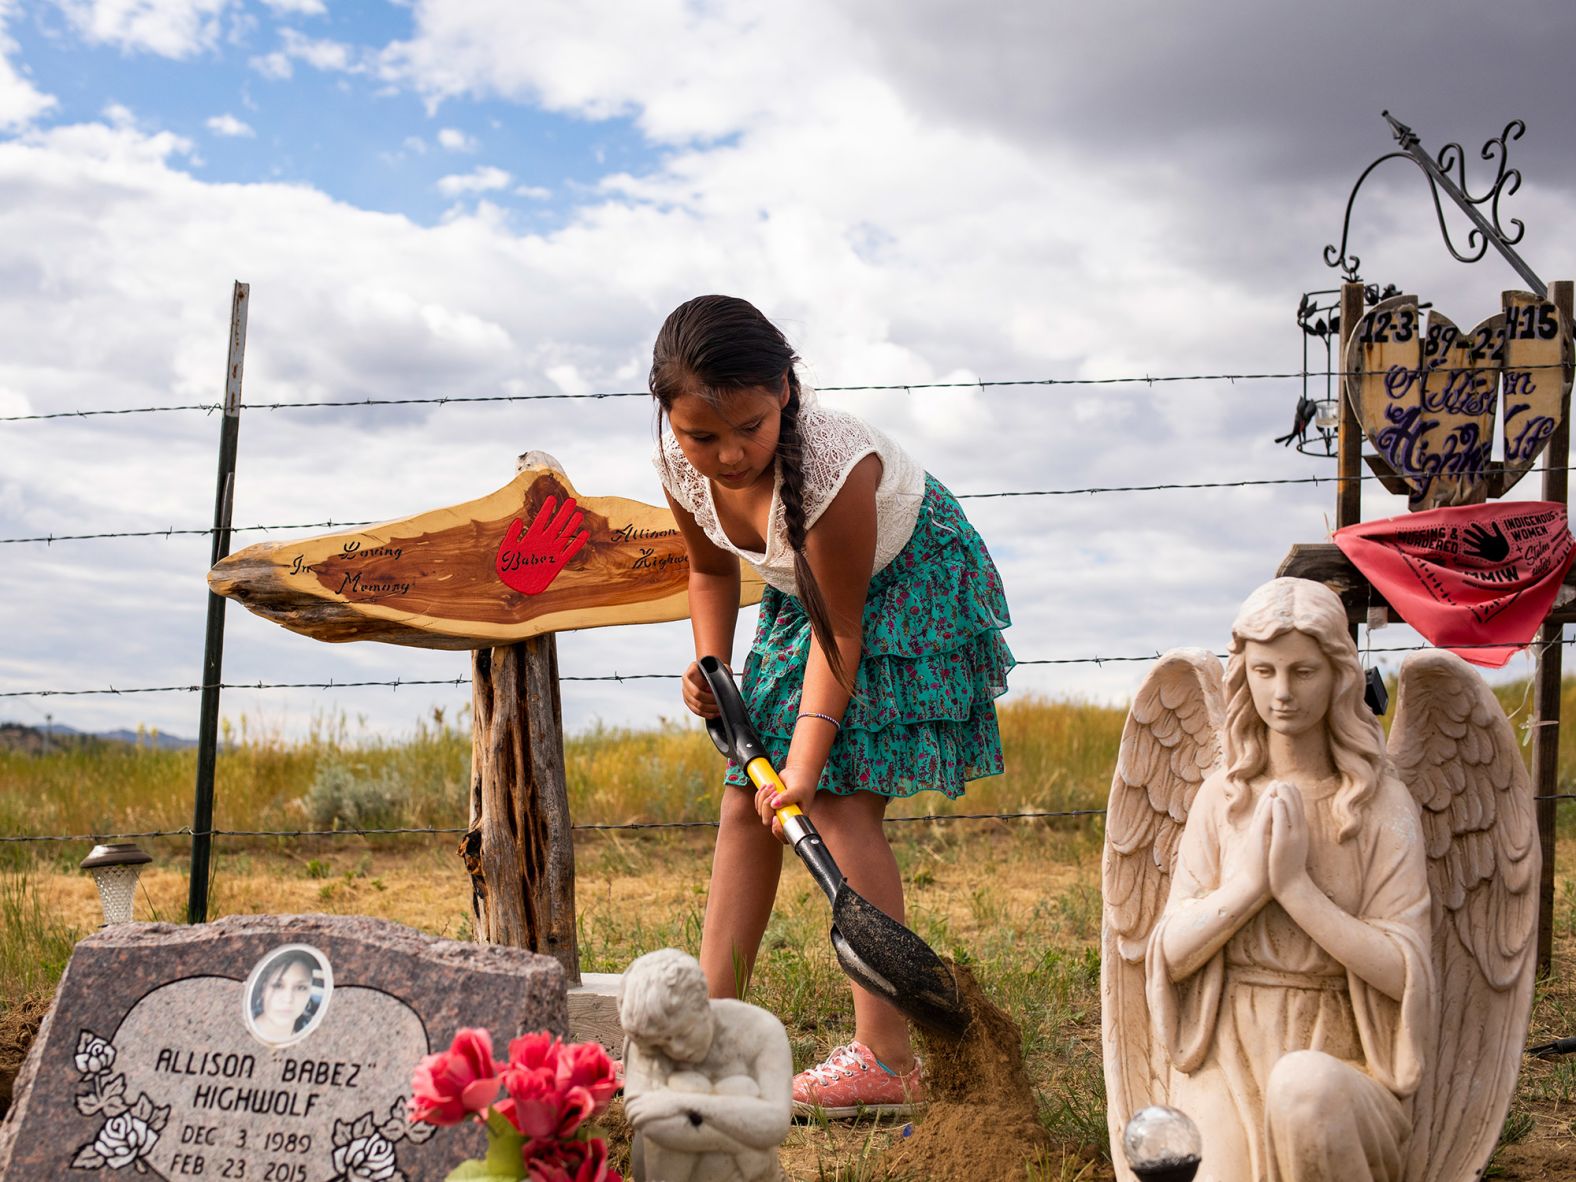 <strong>Tailyr Irvine, based in Missoula, Montana, USA: </strong>Aiyanna, one of four daughters, tends to her mother Allison Highwolf's grave in Busby, Montana, a town on the Northern Cheyenne Reservation. As Elizabeth Williamson <a href="index.php?page=&url=https%3A%2F%2Fwww.nytimes.com%2F2021%2F07%2F11%2Fus%2Fpolitics%2Fallison-highwolf-indian-country.html" target="_blank" target="_blank">reported for The New York Times:</a> Allison Highwolf's body was 'found alone in a motel room in February 2015. She died at 26 years old of smoke inhalation from a fire of unclear origin ... Six years later, the circumstances of Highwolf's death remains a mystery, one of many involving Native women who disappear or meet violent ends with alarming regularity.'<br /> <br />I met with the family and spent the day hearing about Allison and the case. That afternoon they planned to visit her grave to place a grave marker. I asked if I could attend and they graciously let me observe and photograph. I tried my best to keep a distance during their time at the grave to respect their privacy.<br /> <br />It's hard to visualize grief and loss but every time I look at this photo I am hit with the loss I feel for Aiyanna and her family. We hear a lot about the <a href="index.php?page=&url=https%3A%2F%2Fwww.nativehope.org%2Fen-us%2Funderstanding-the-issue-of-missing-and-murdered-indigenous-women" target="_blank" target="_blank">Missing and Murdered Indigenous Women</a> crisis but we rarely see the aftermath, the path of destruction unsolved cases leave.